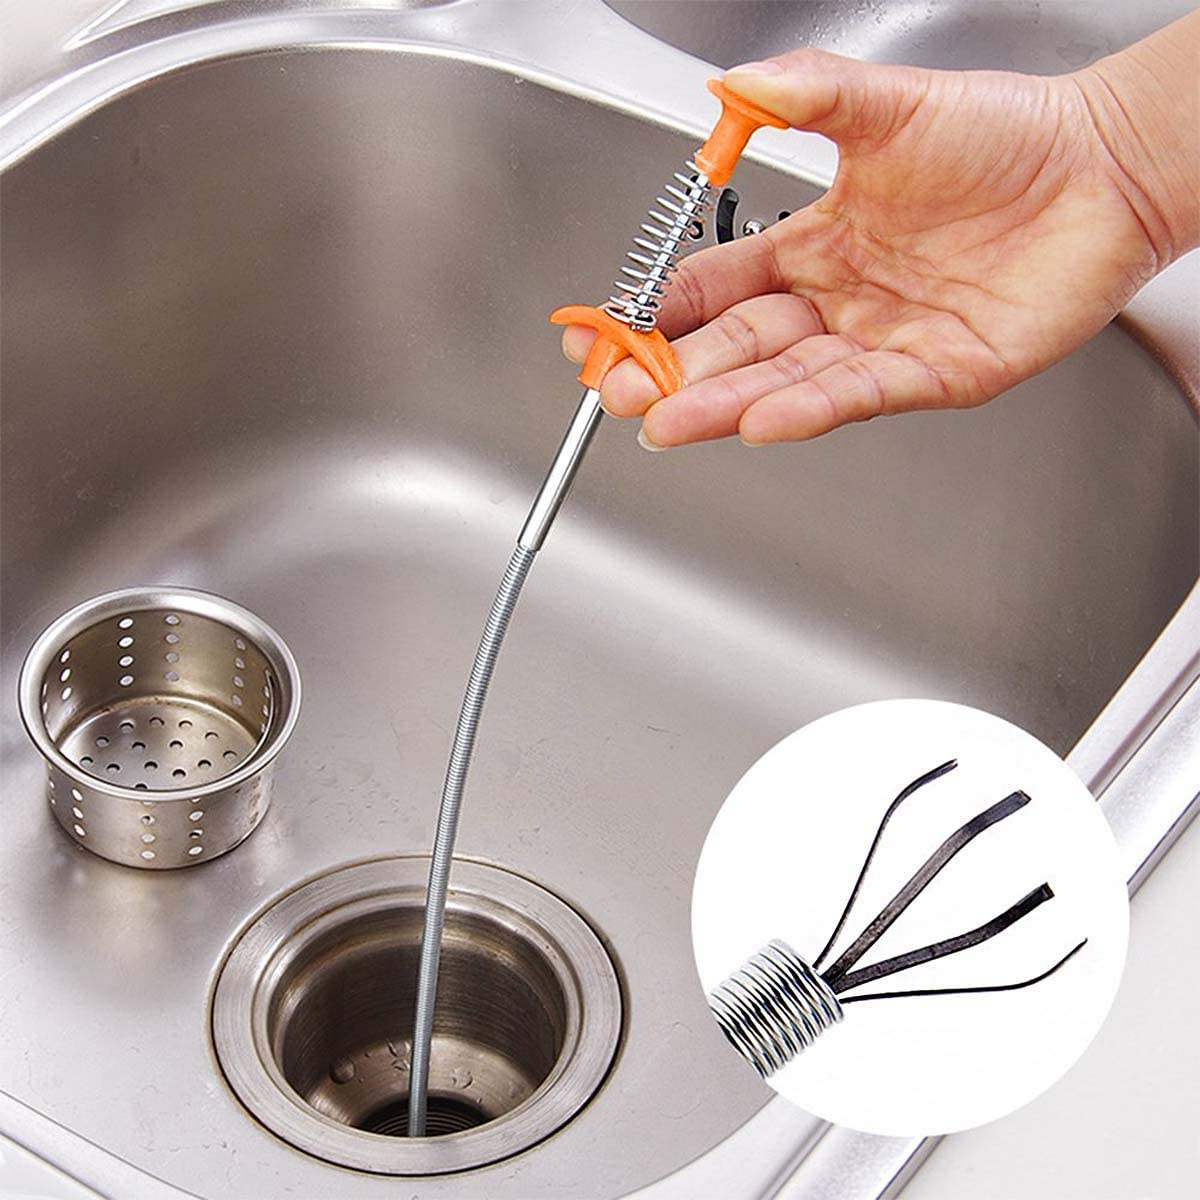 Cleaner for drains